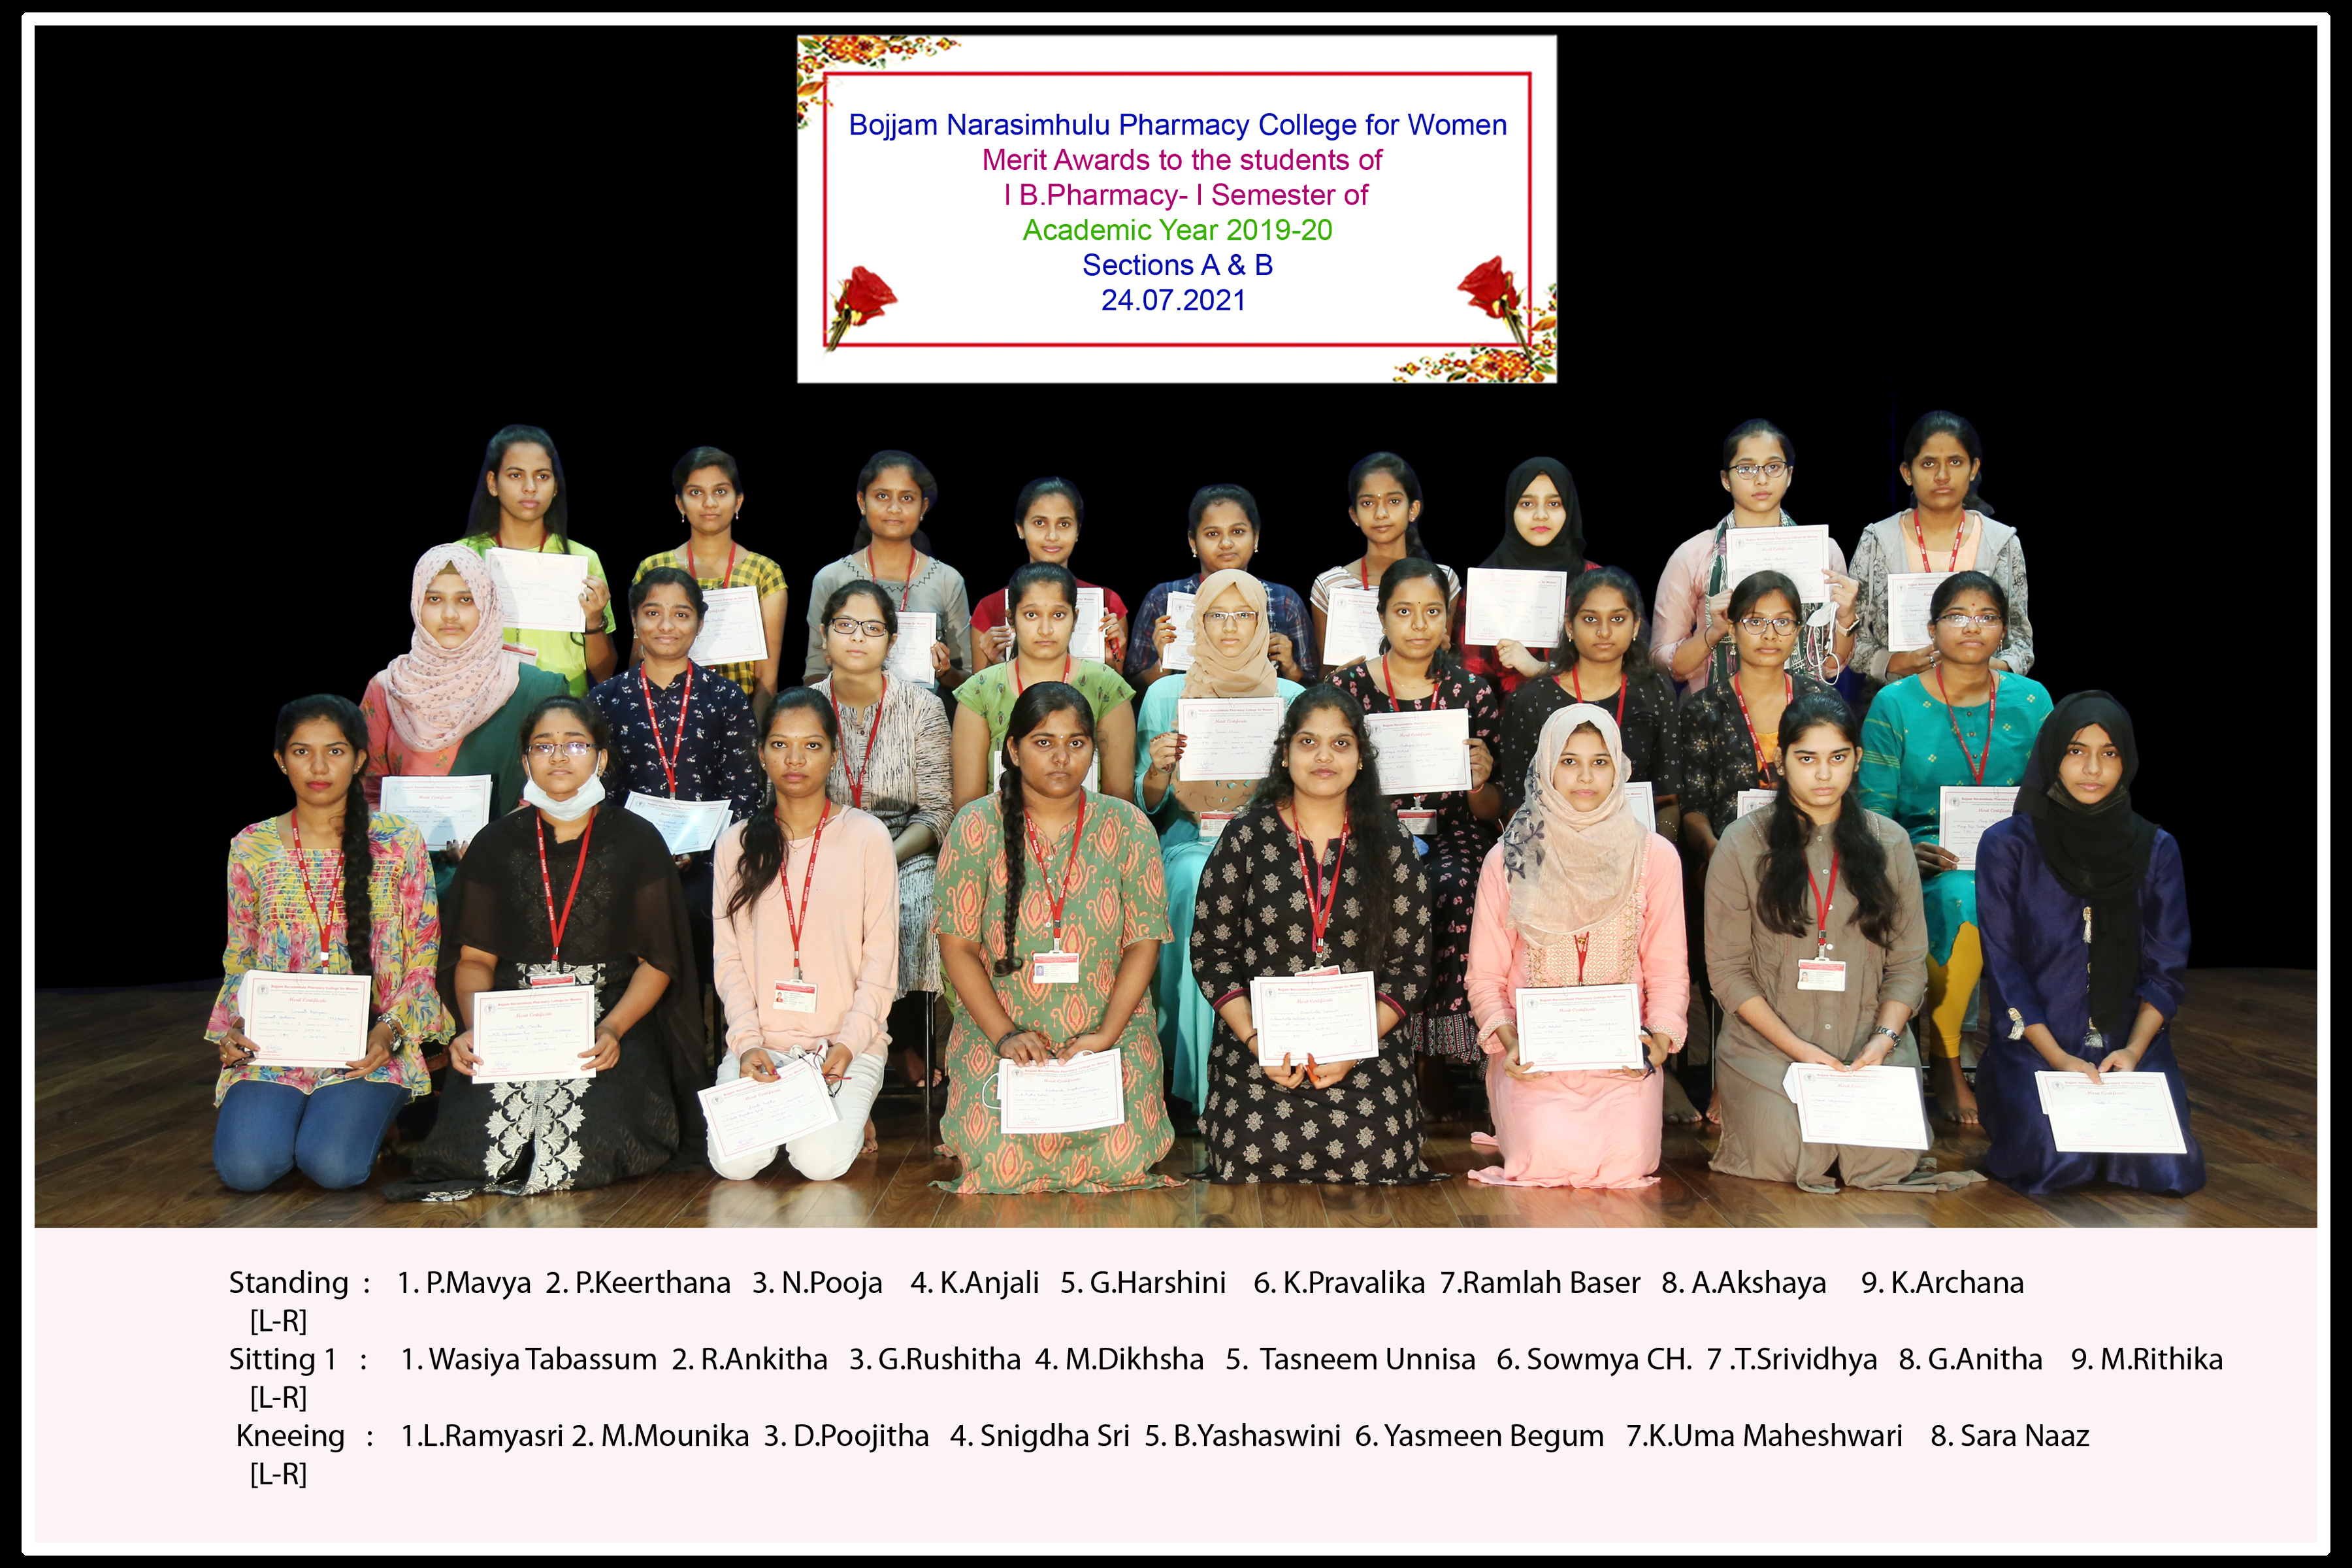 Merit awards to the students of I year I Semester for the Academic year 2019-20